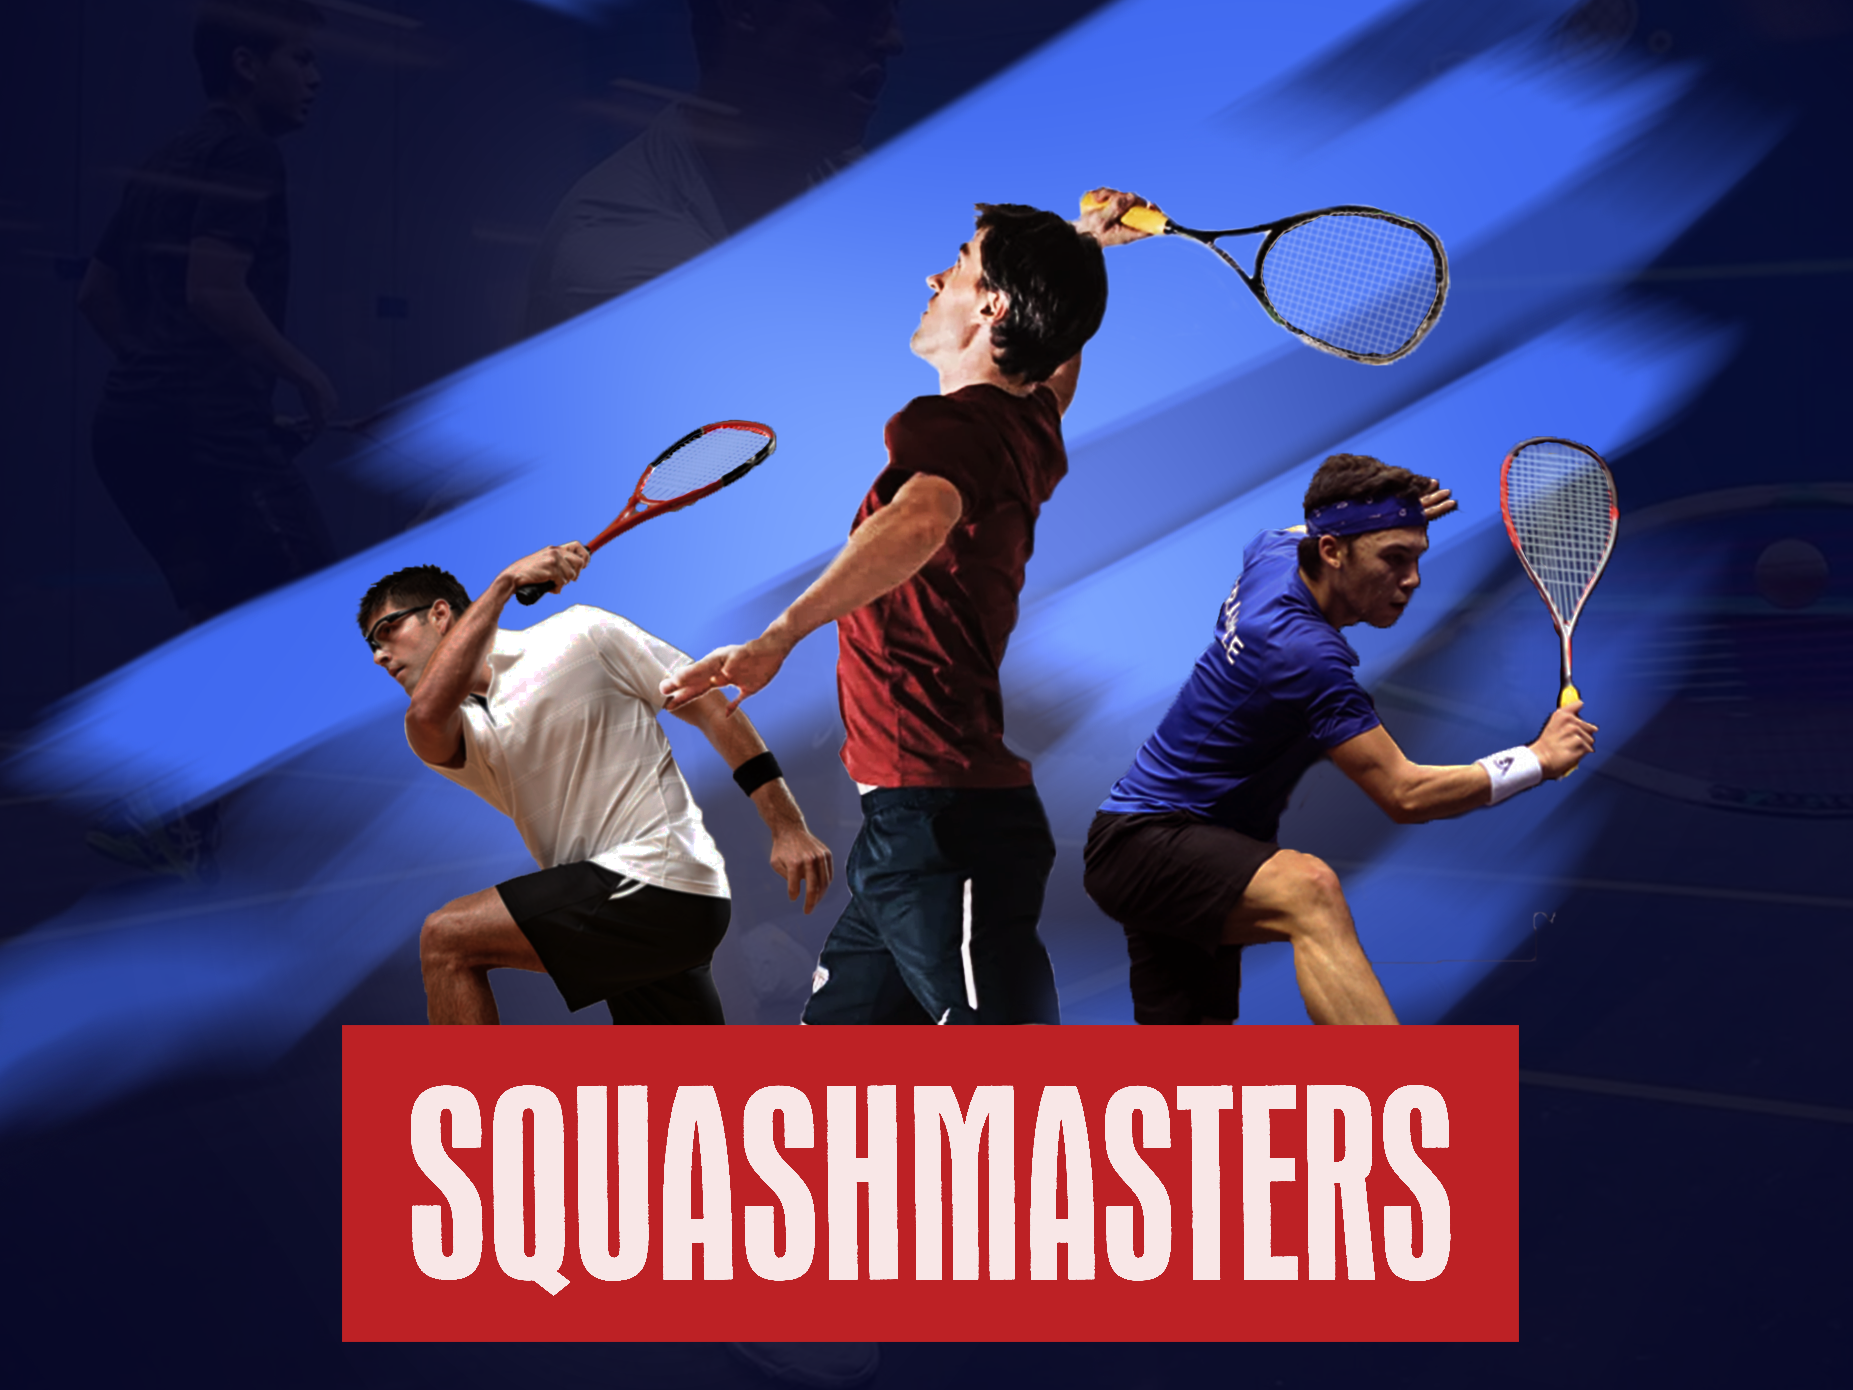 http://squashcity.pl/wp-content/uploads/2020/10/squashmasters-cover-thumb.png